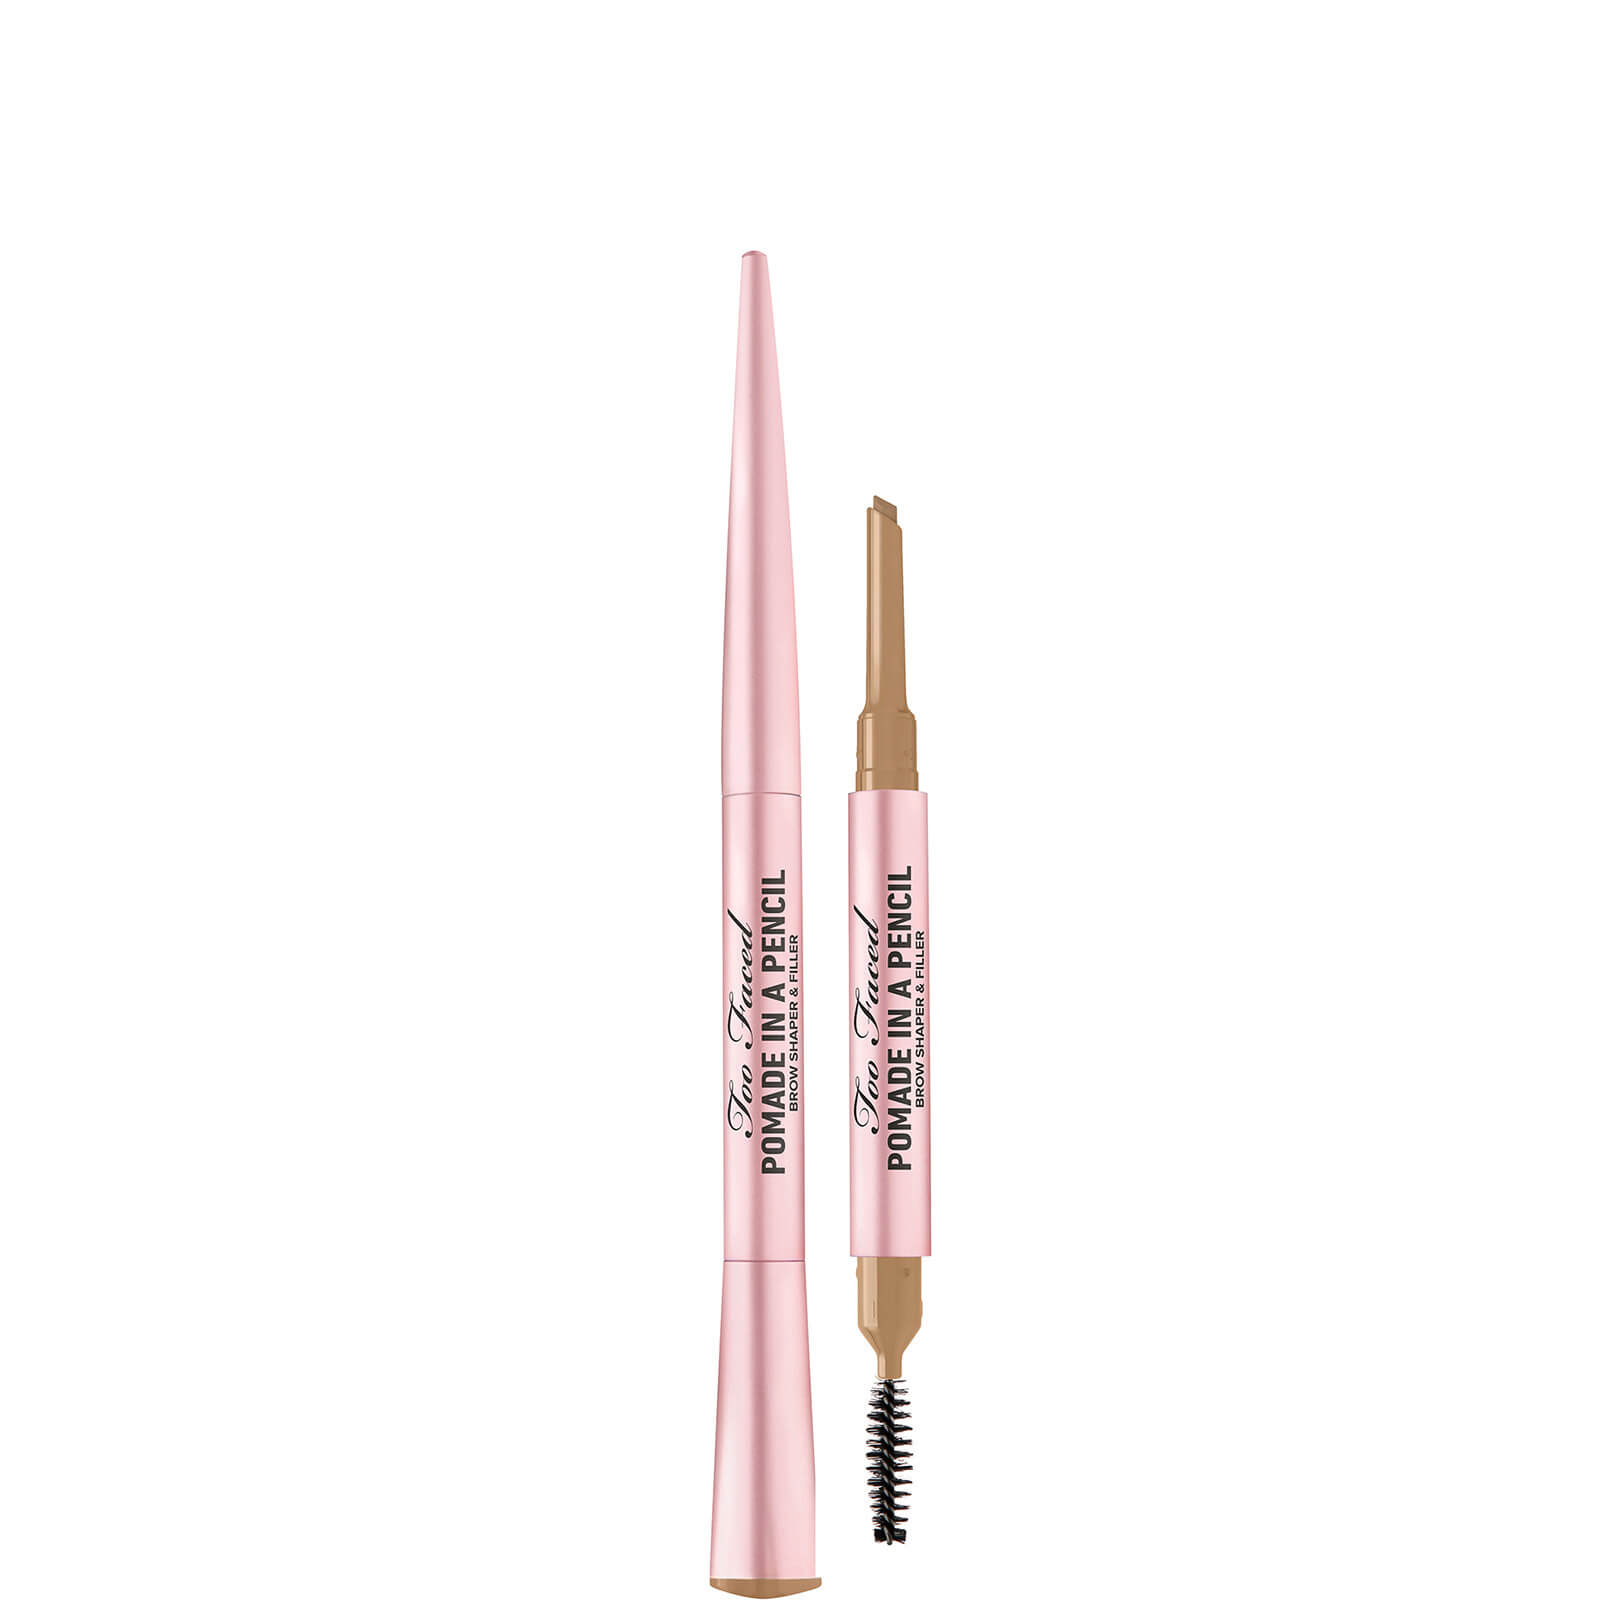 Image of Brow Pomade in a Pencil Too Faced 0,19g (Various Shades) - Natural Blonde